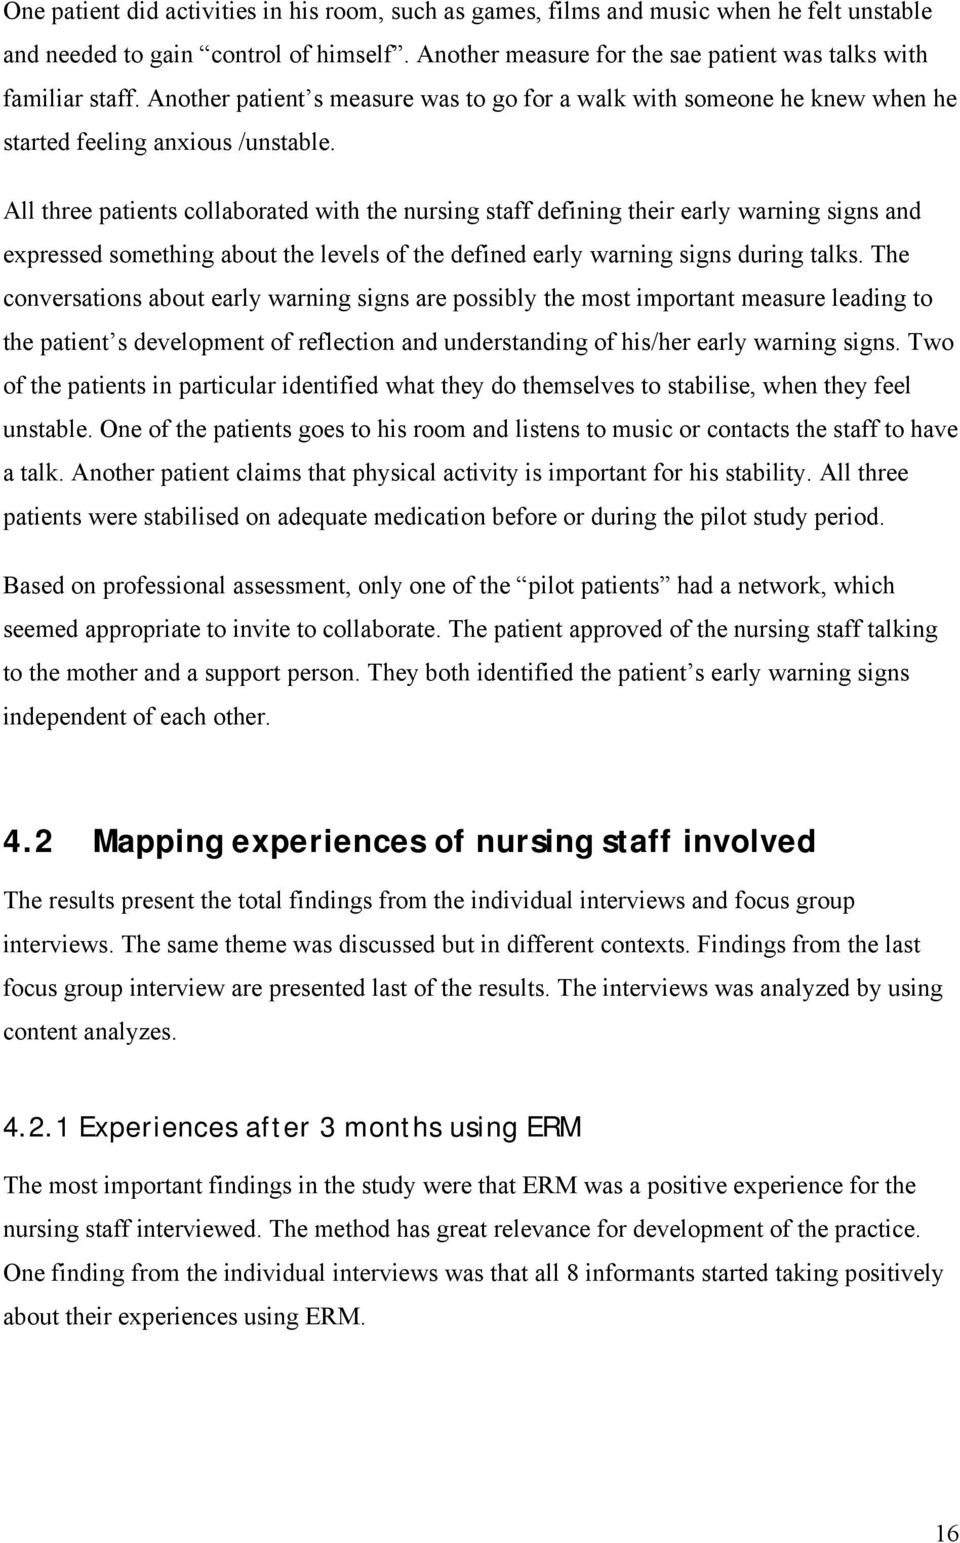 All three patients collaborated with the nursing staff defining their early warning signs and expressed something about the levels of the defined early warning signs during talks.